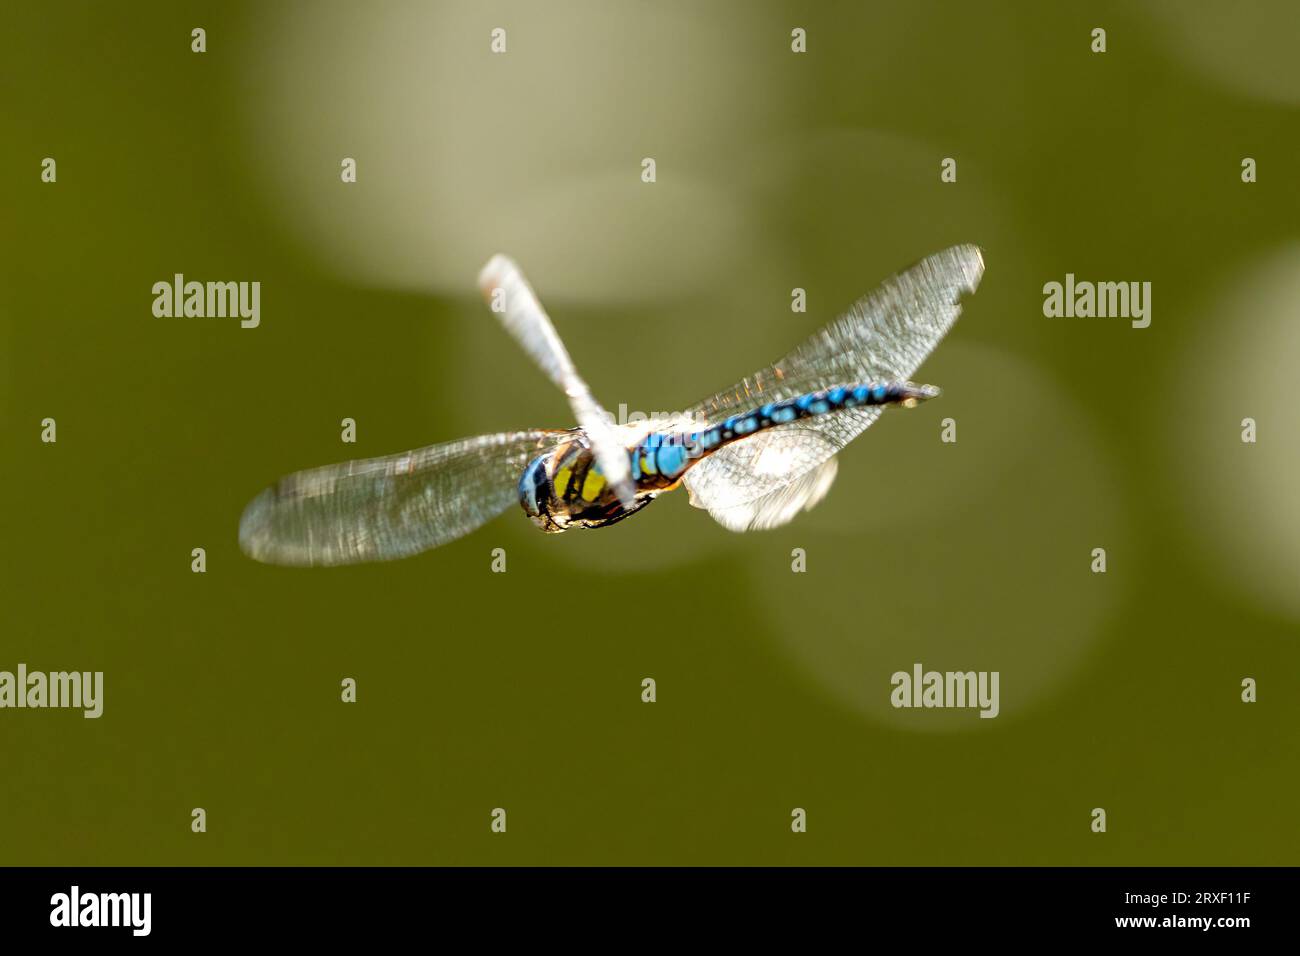 A Blue-green mosaic maiden during the flight Stock Photo